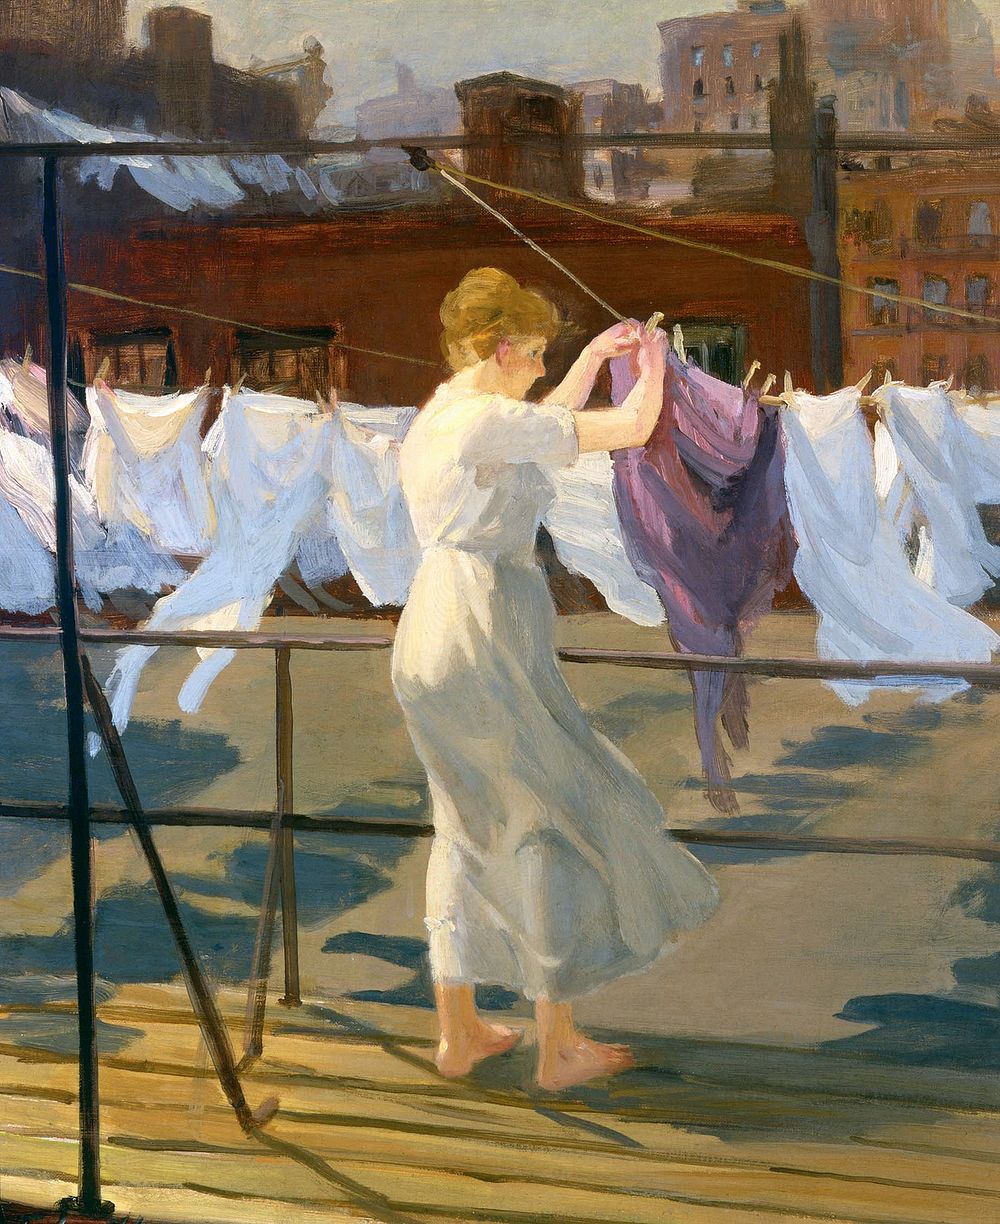 Sun And Wind On The Roof (1915) oil painting art by John Sloan. Original public domain image from Wikimedia Commons.…